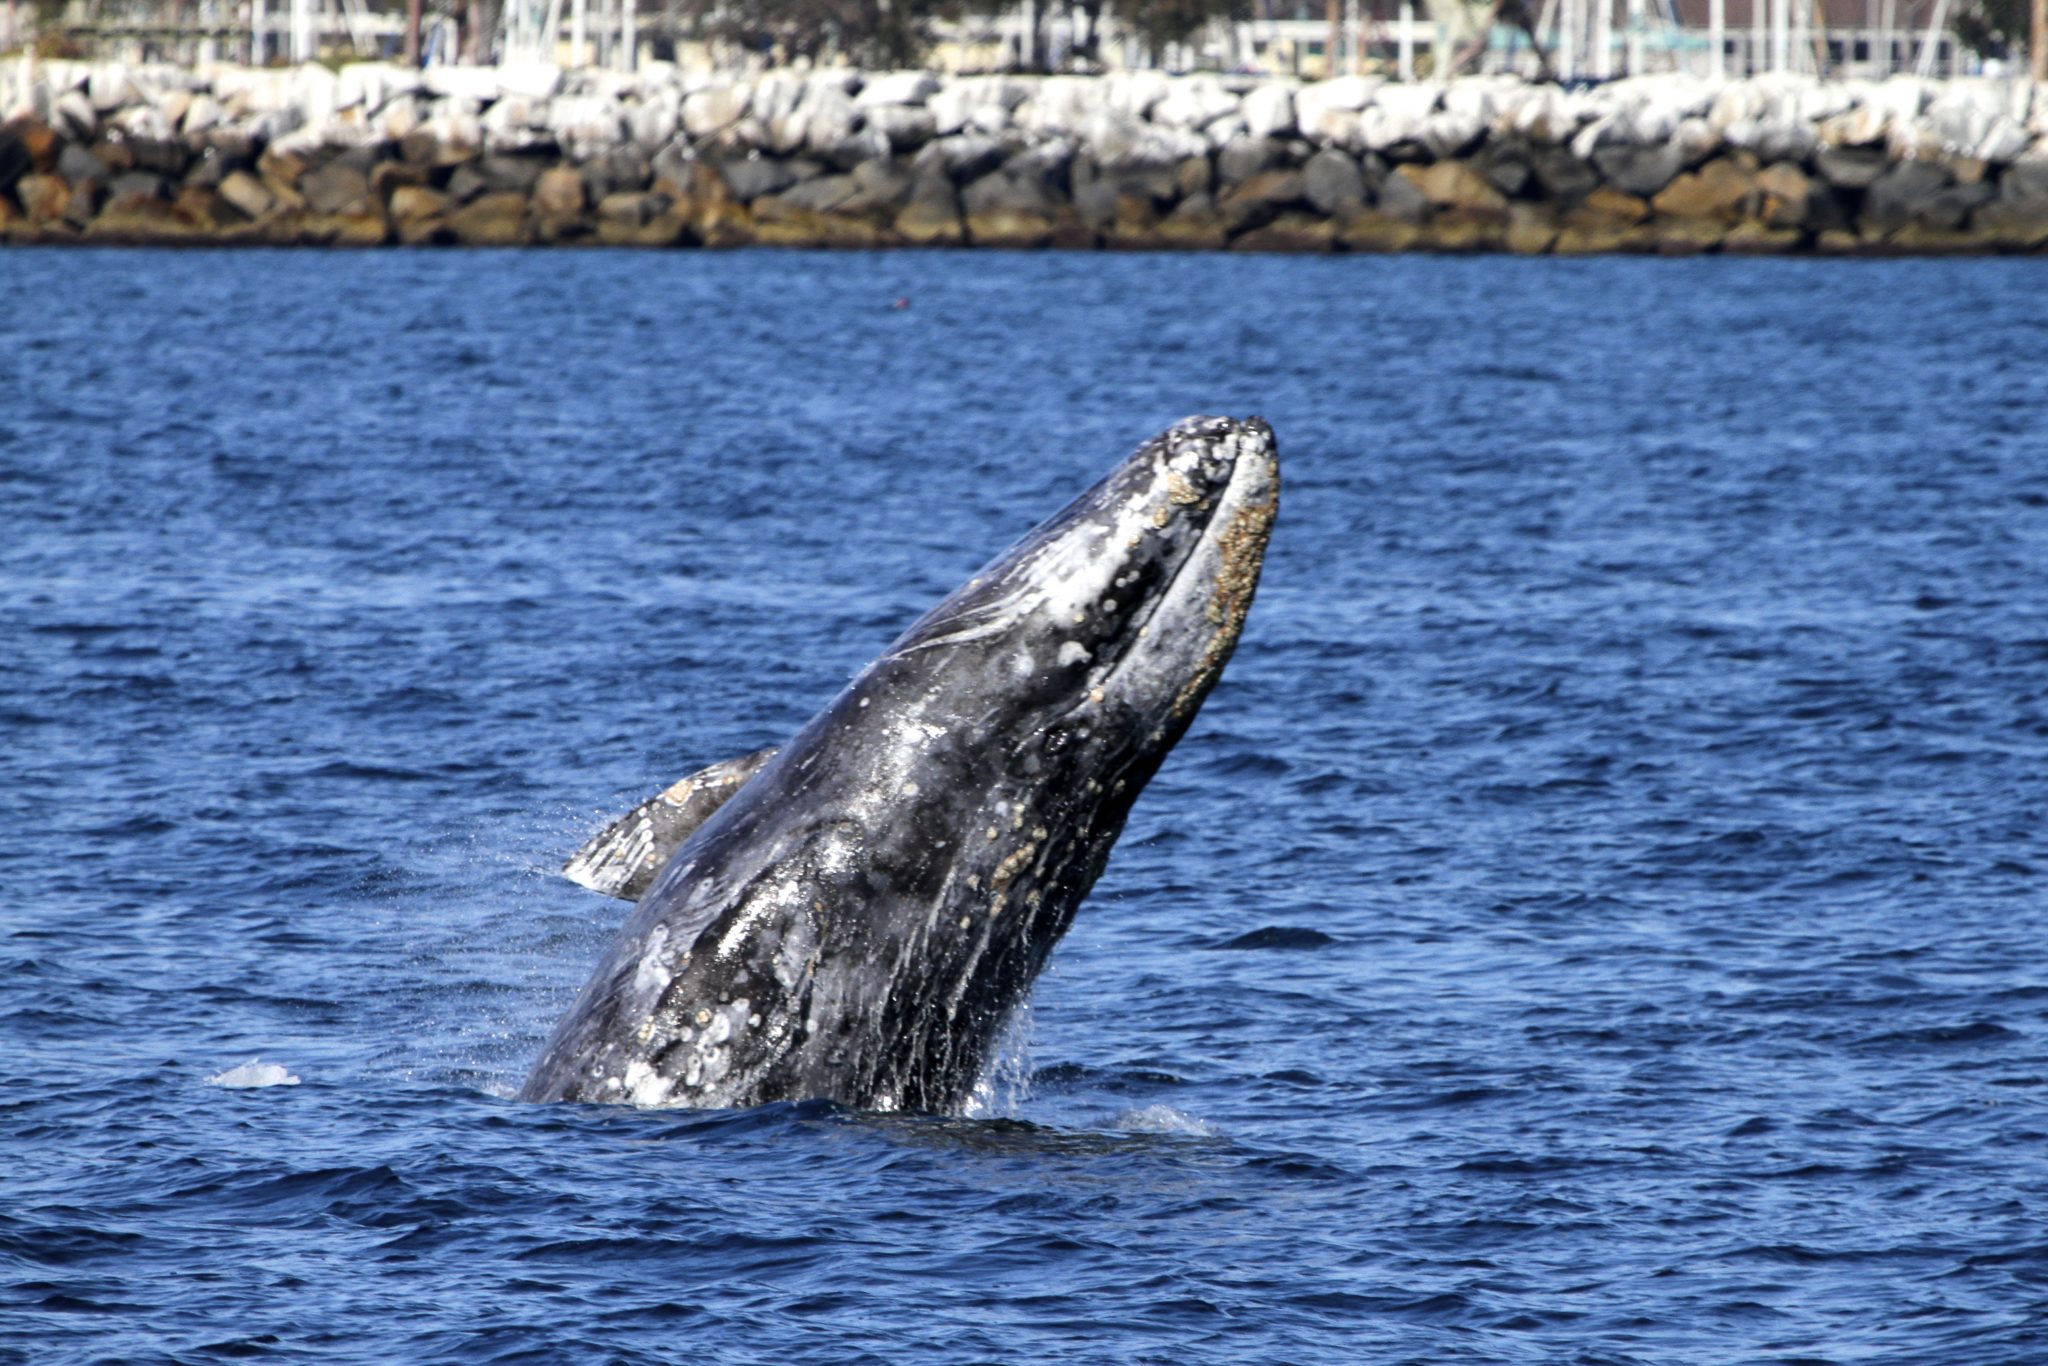 Whale Watching at Dana Point Harbor